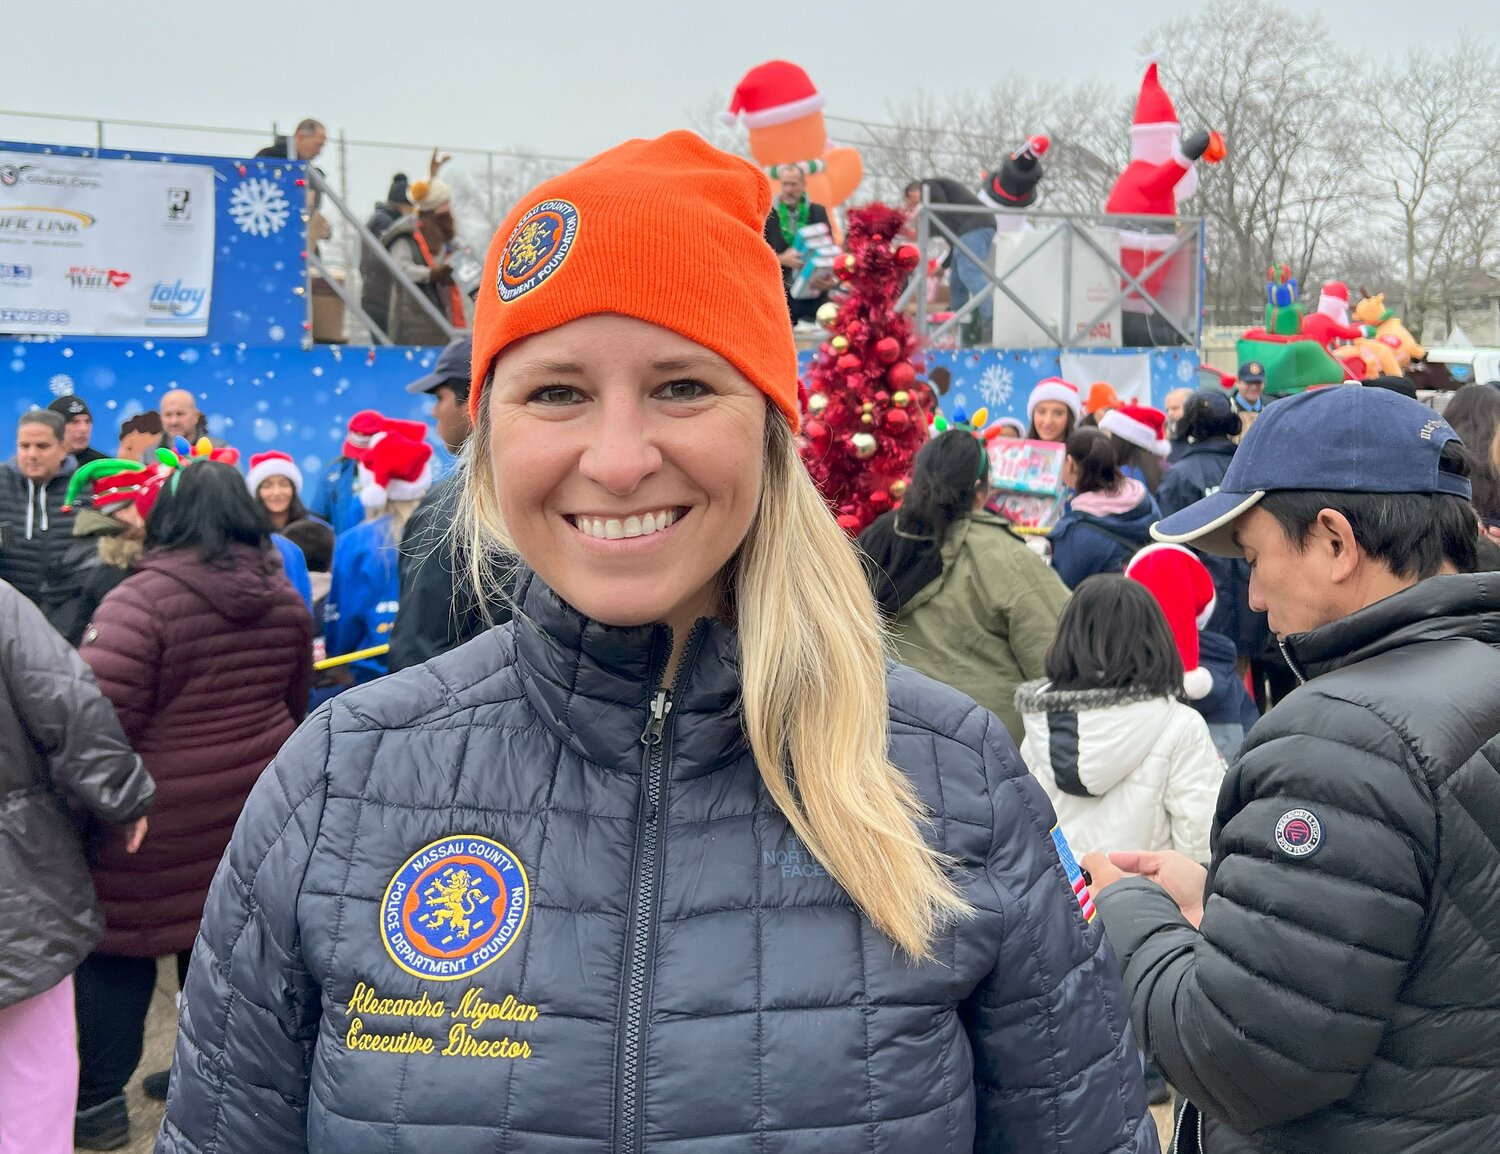 Alexandra Nigolian, executive director of the Nassau County Police Department Foundation, said this year’s toy giveaway is the foundation’s seventh, and that each district was asked to bring 1,000 of its neediest children to a designated location to receive toys.